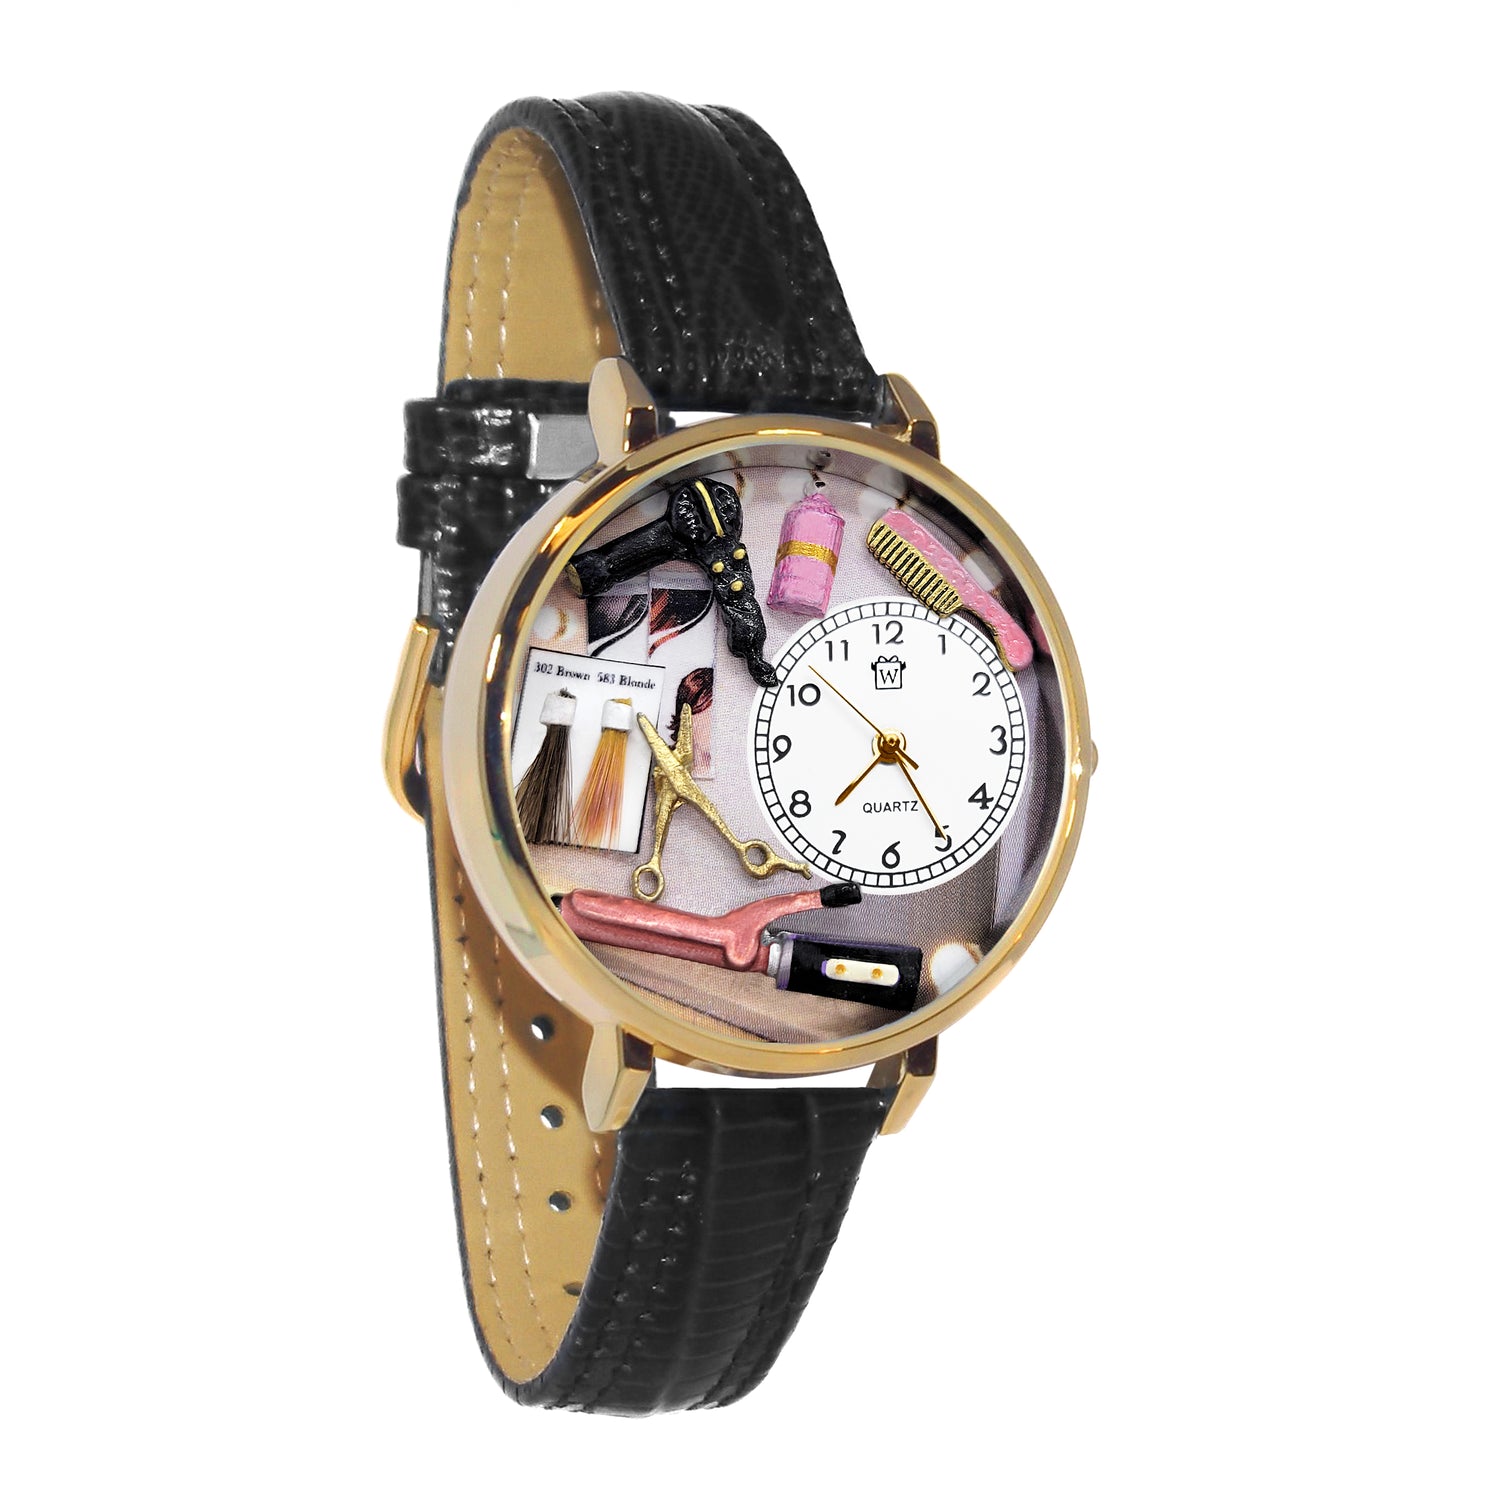 Whimsical Gifts | Hair Stylist 3D Watch Large Style | Handmade in USA | Professions Themed | Salon & Spa Professions | Novelty Unique Fun Miniatures Gift | Gold Finish Black Leather Watch Band